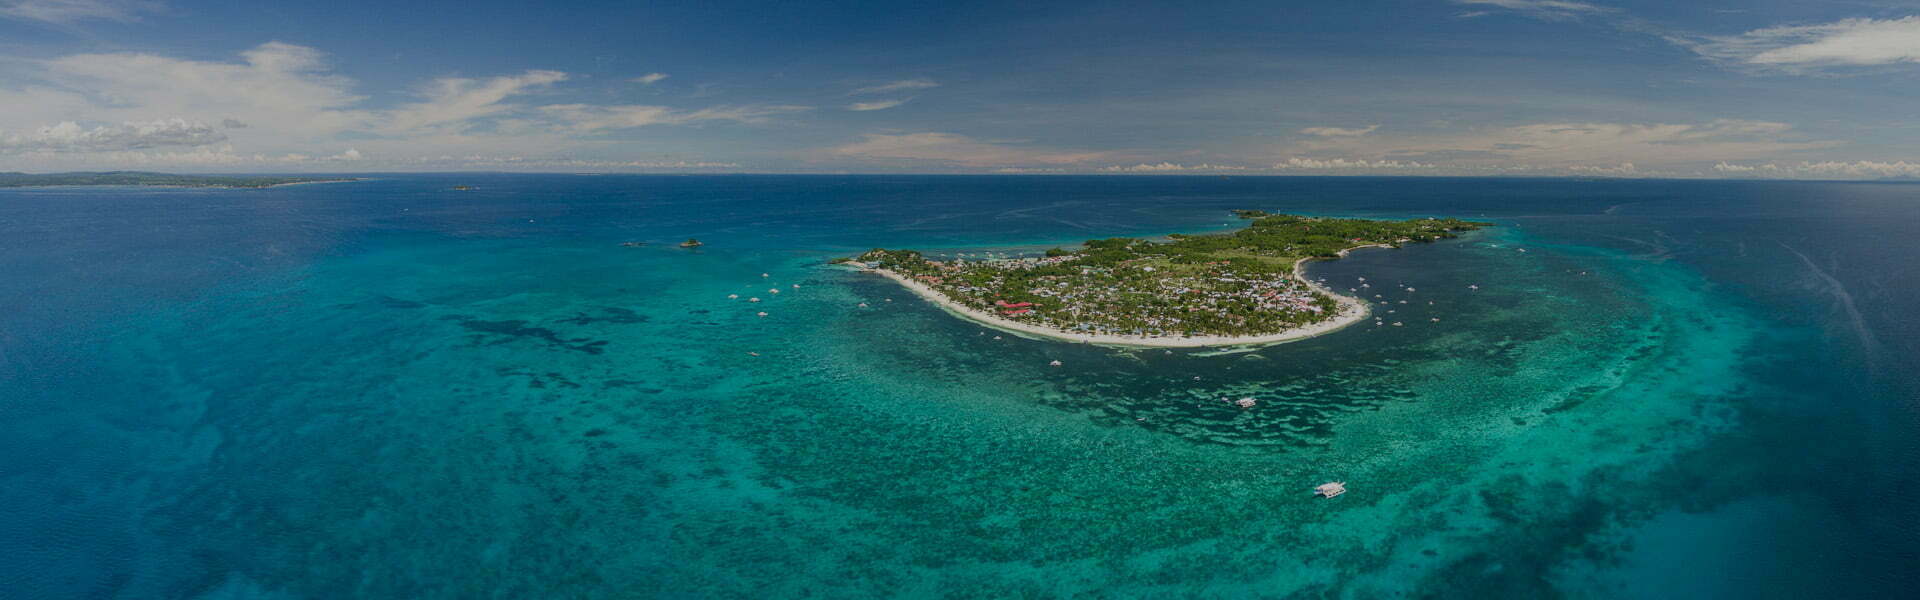 Aerial view of Malapascua. The island is known for Thresher Sharks and white sand beaches - Photo by Discover Malapascua